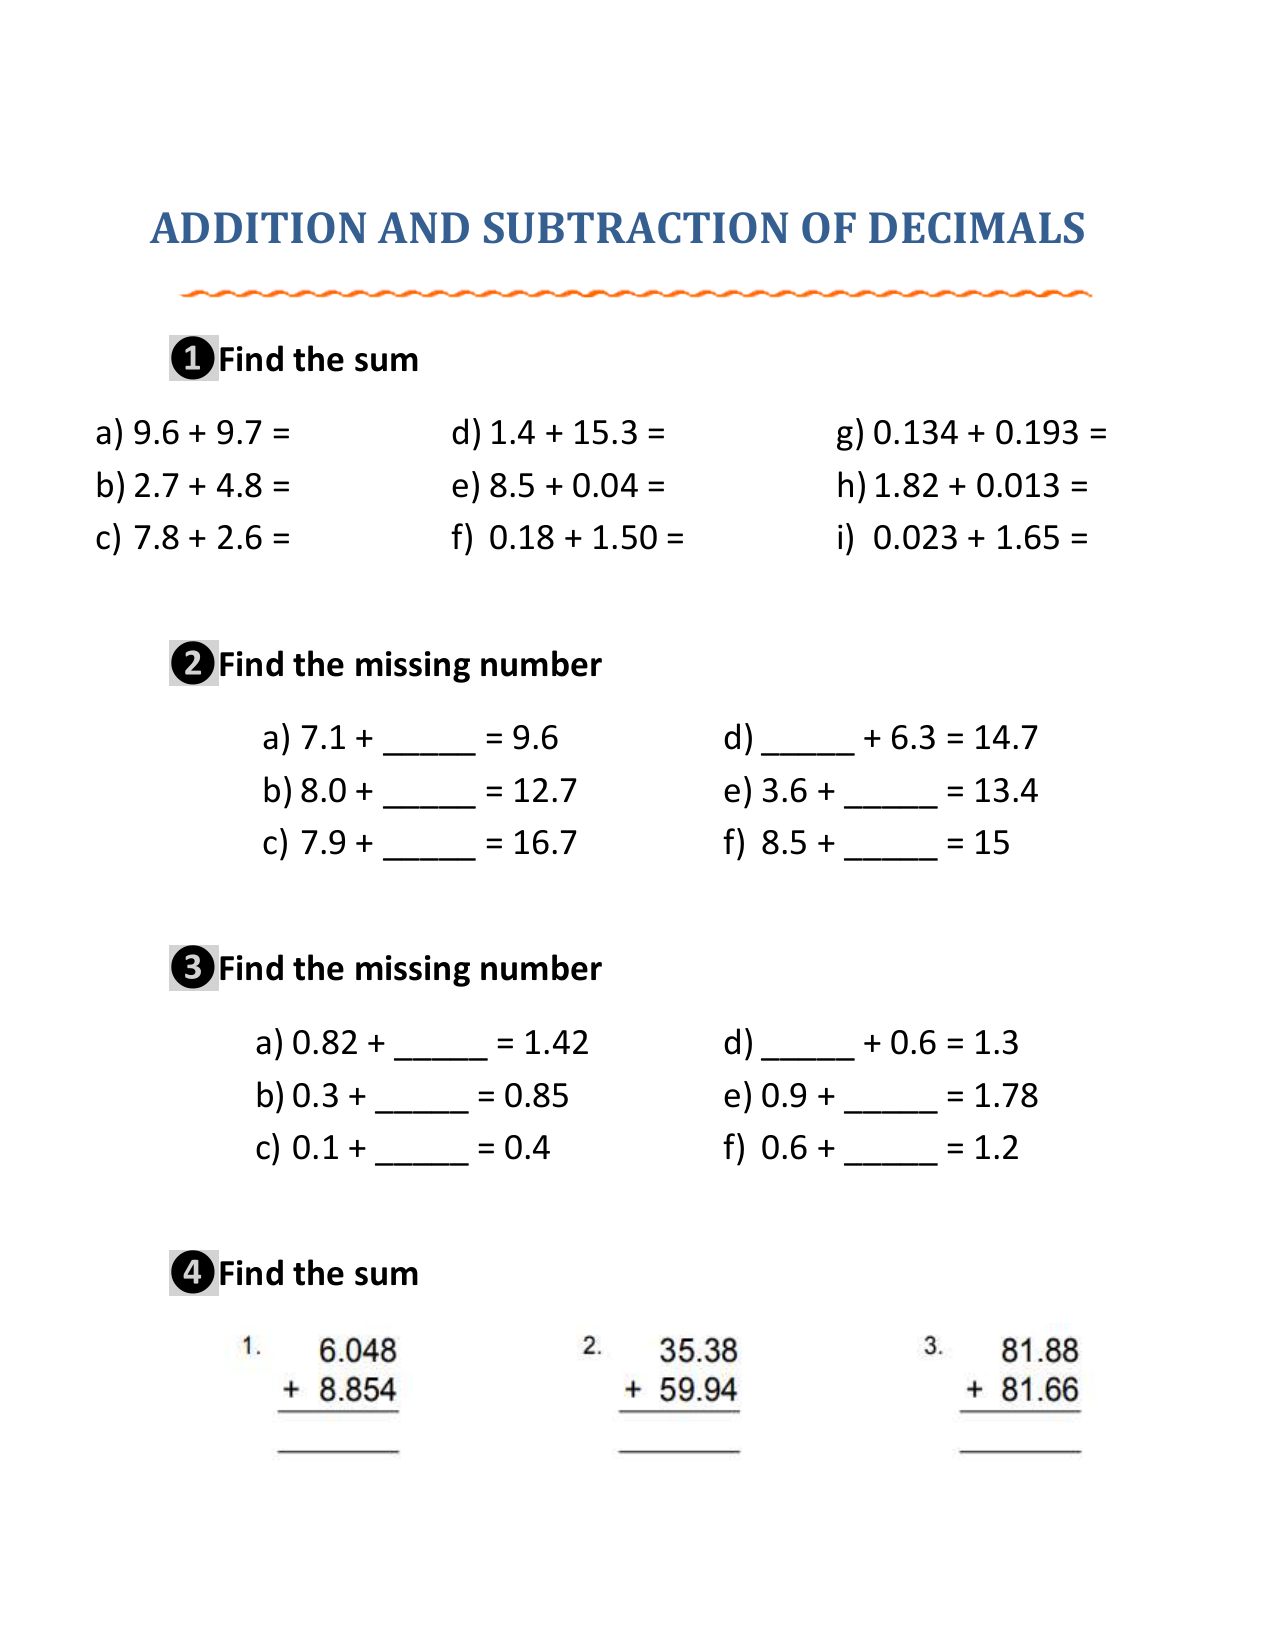 problem solving involving addition and subtraction of decimals worksheets